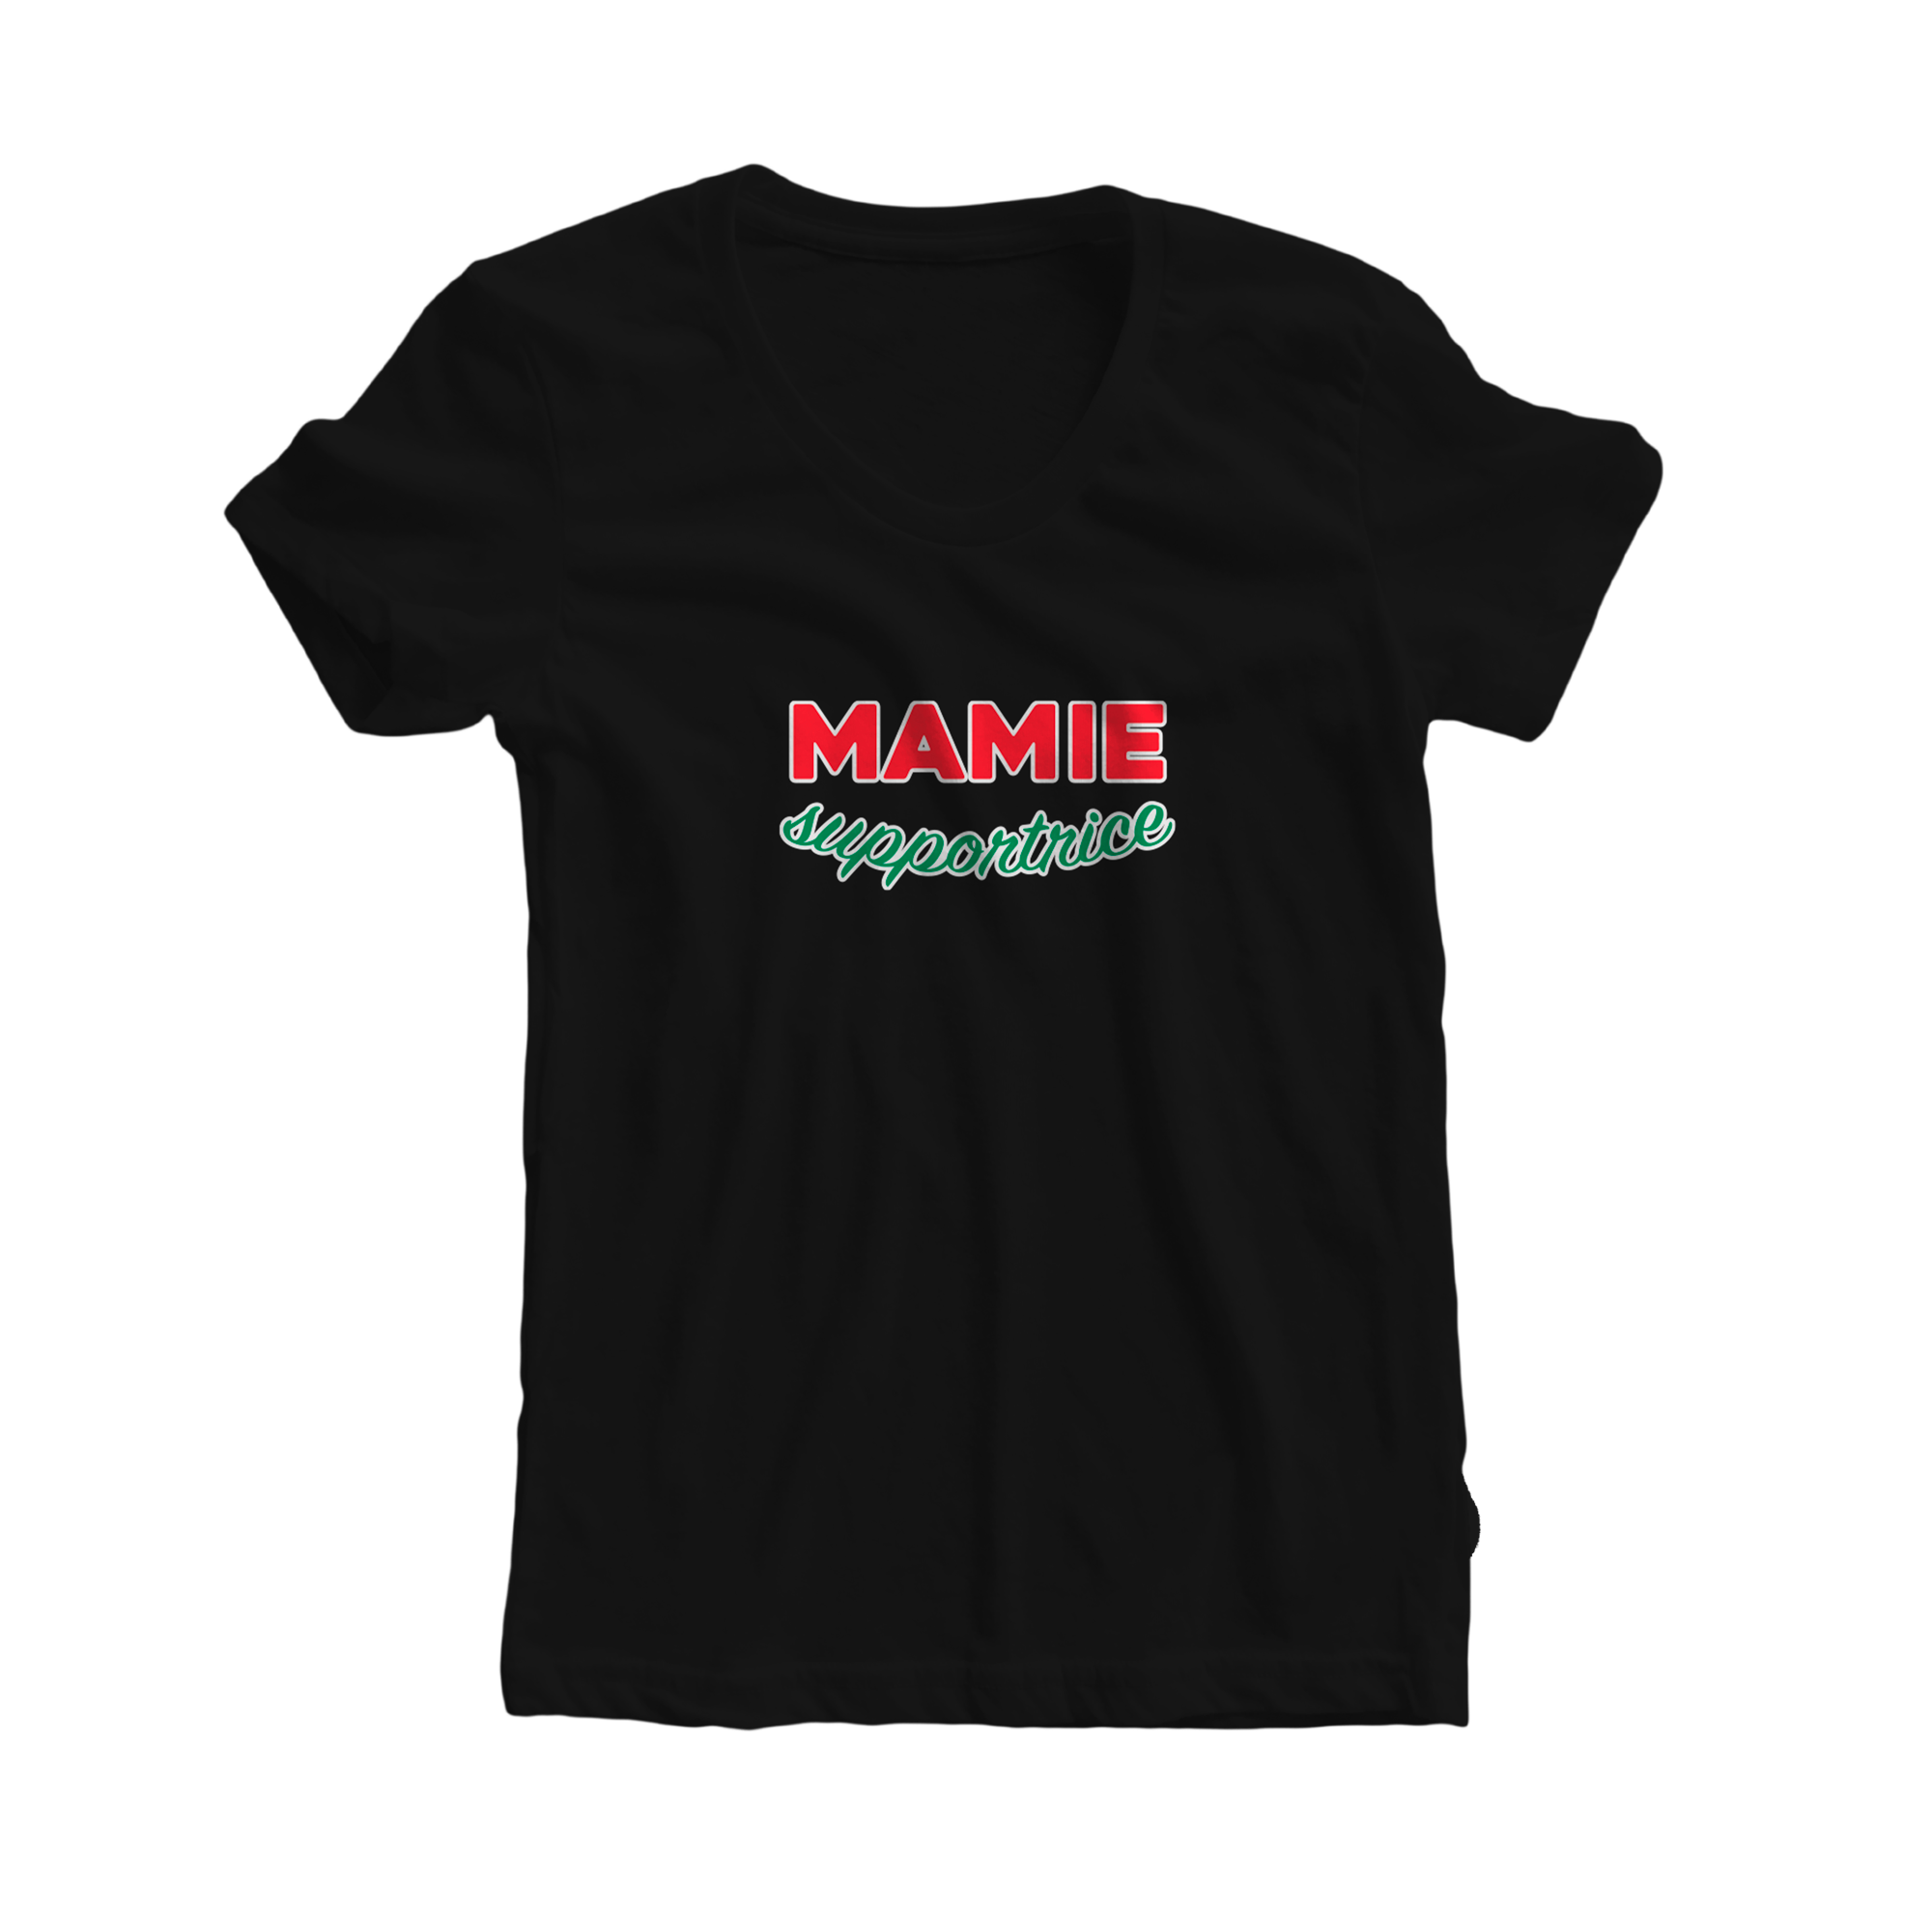 MAMIE supportrice - T-SHIRT (Femme)